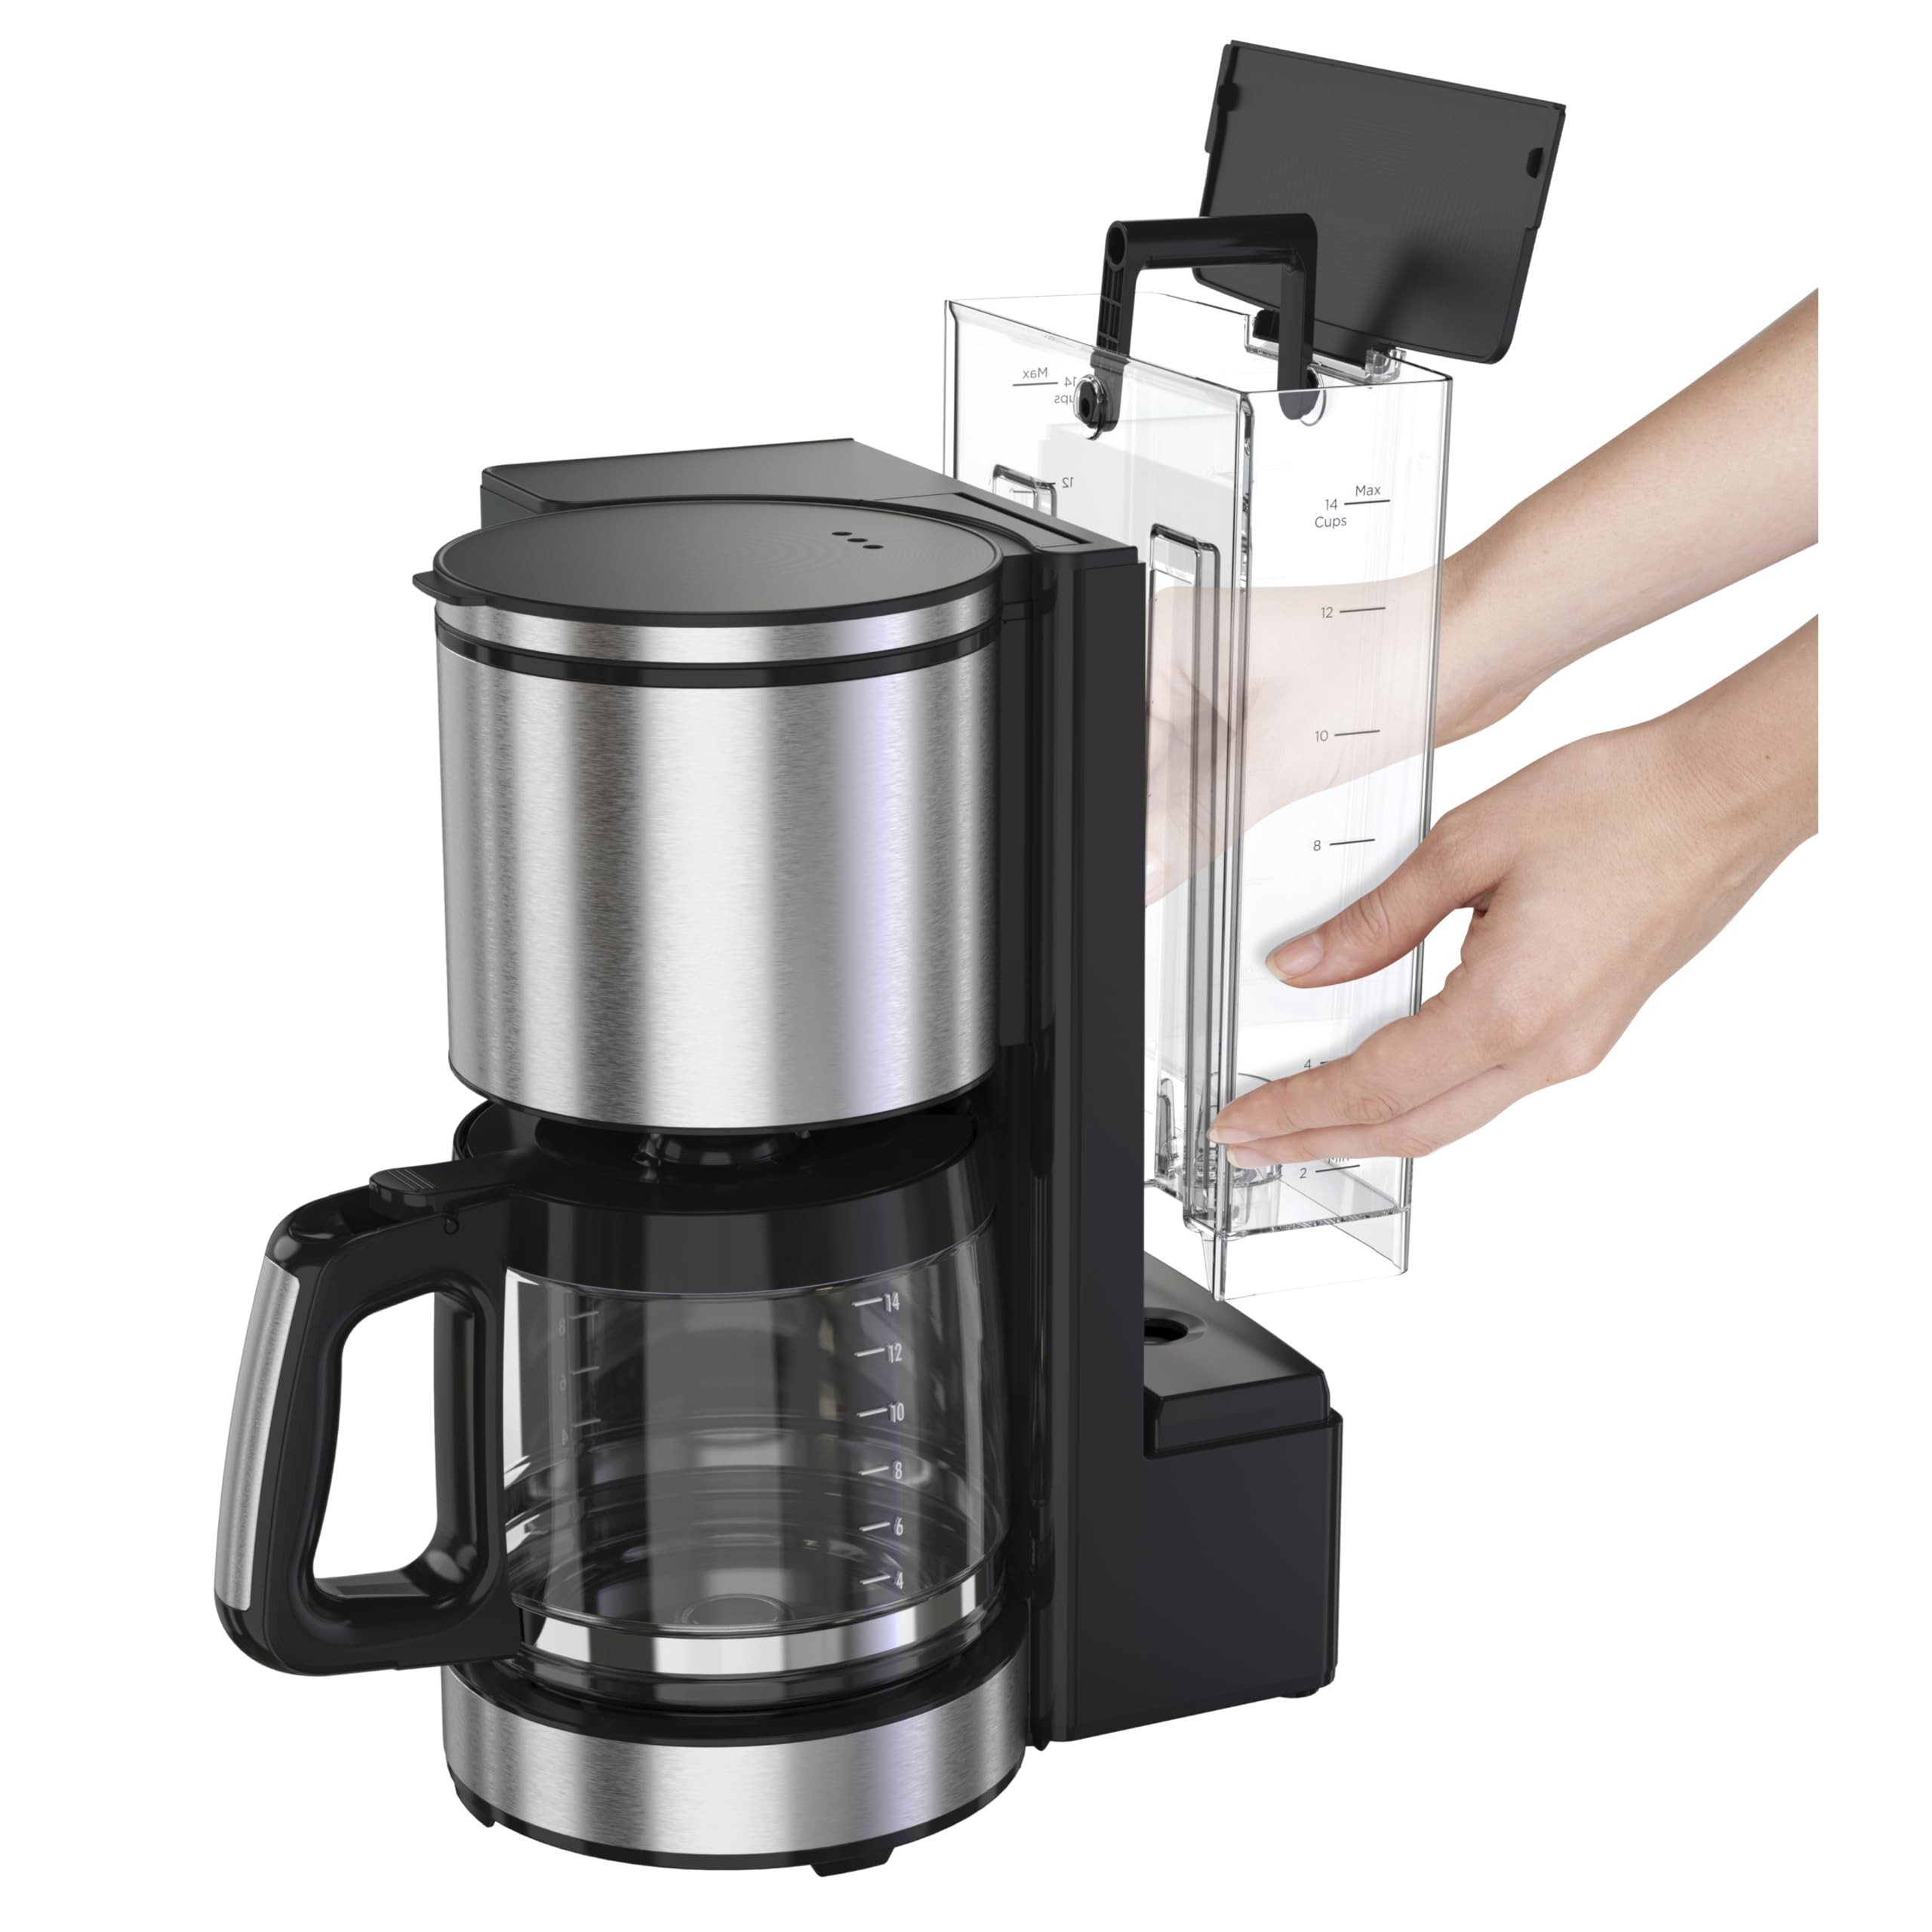 Hamilton Beach 14 Cup Programmable Coffee Maker with Easy Measure Light Up Reusable Filter, Removable 70 Oz. Water Reservoir, Black and Stainless Steel